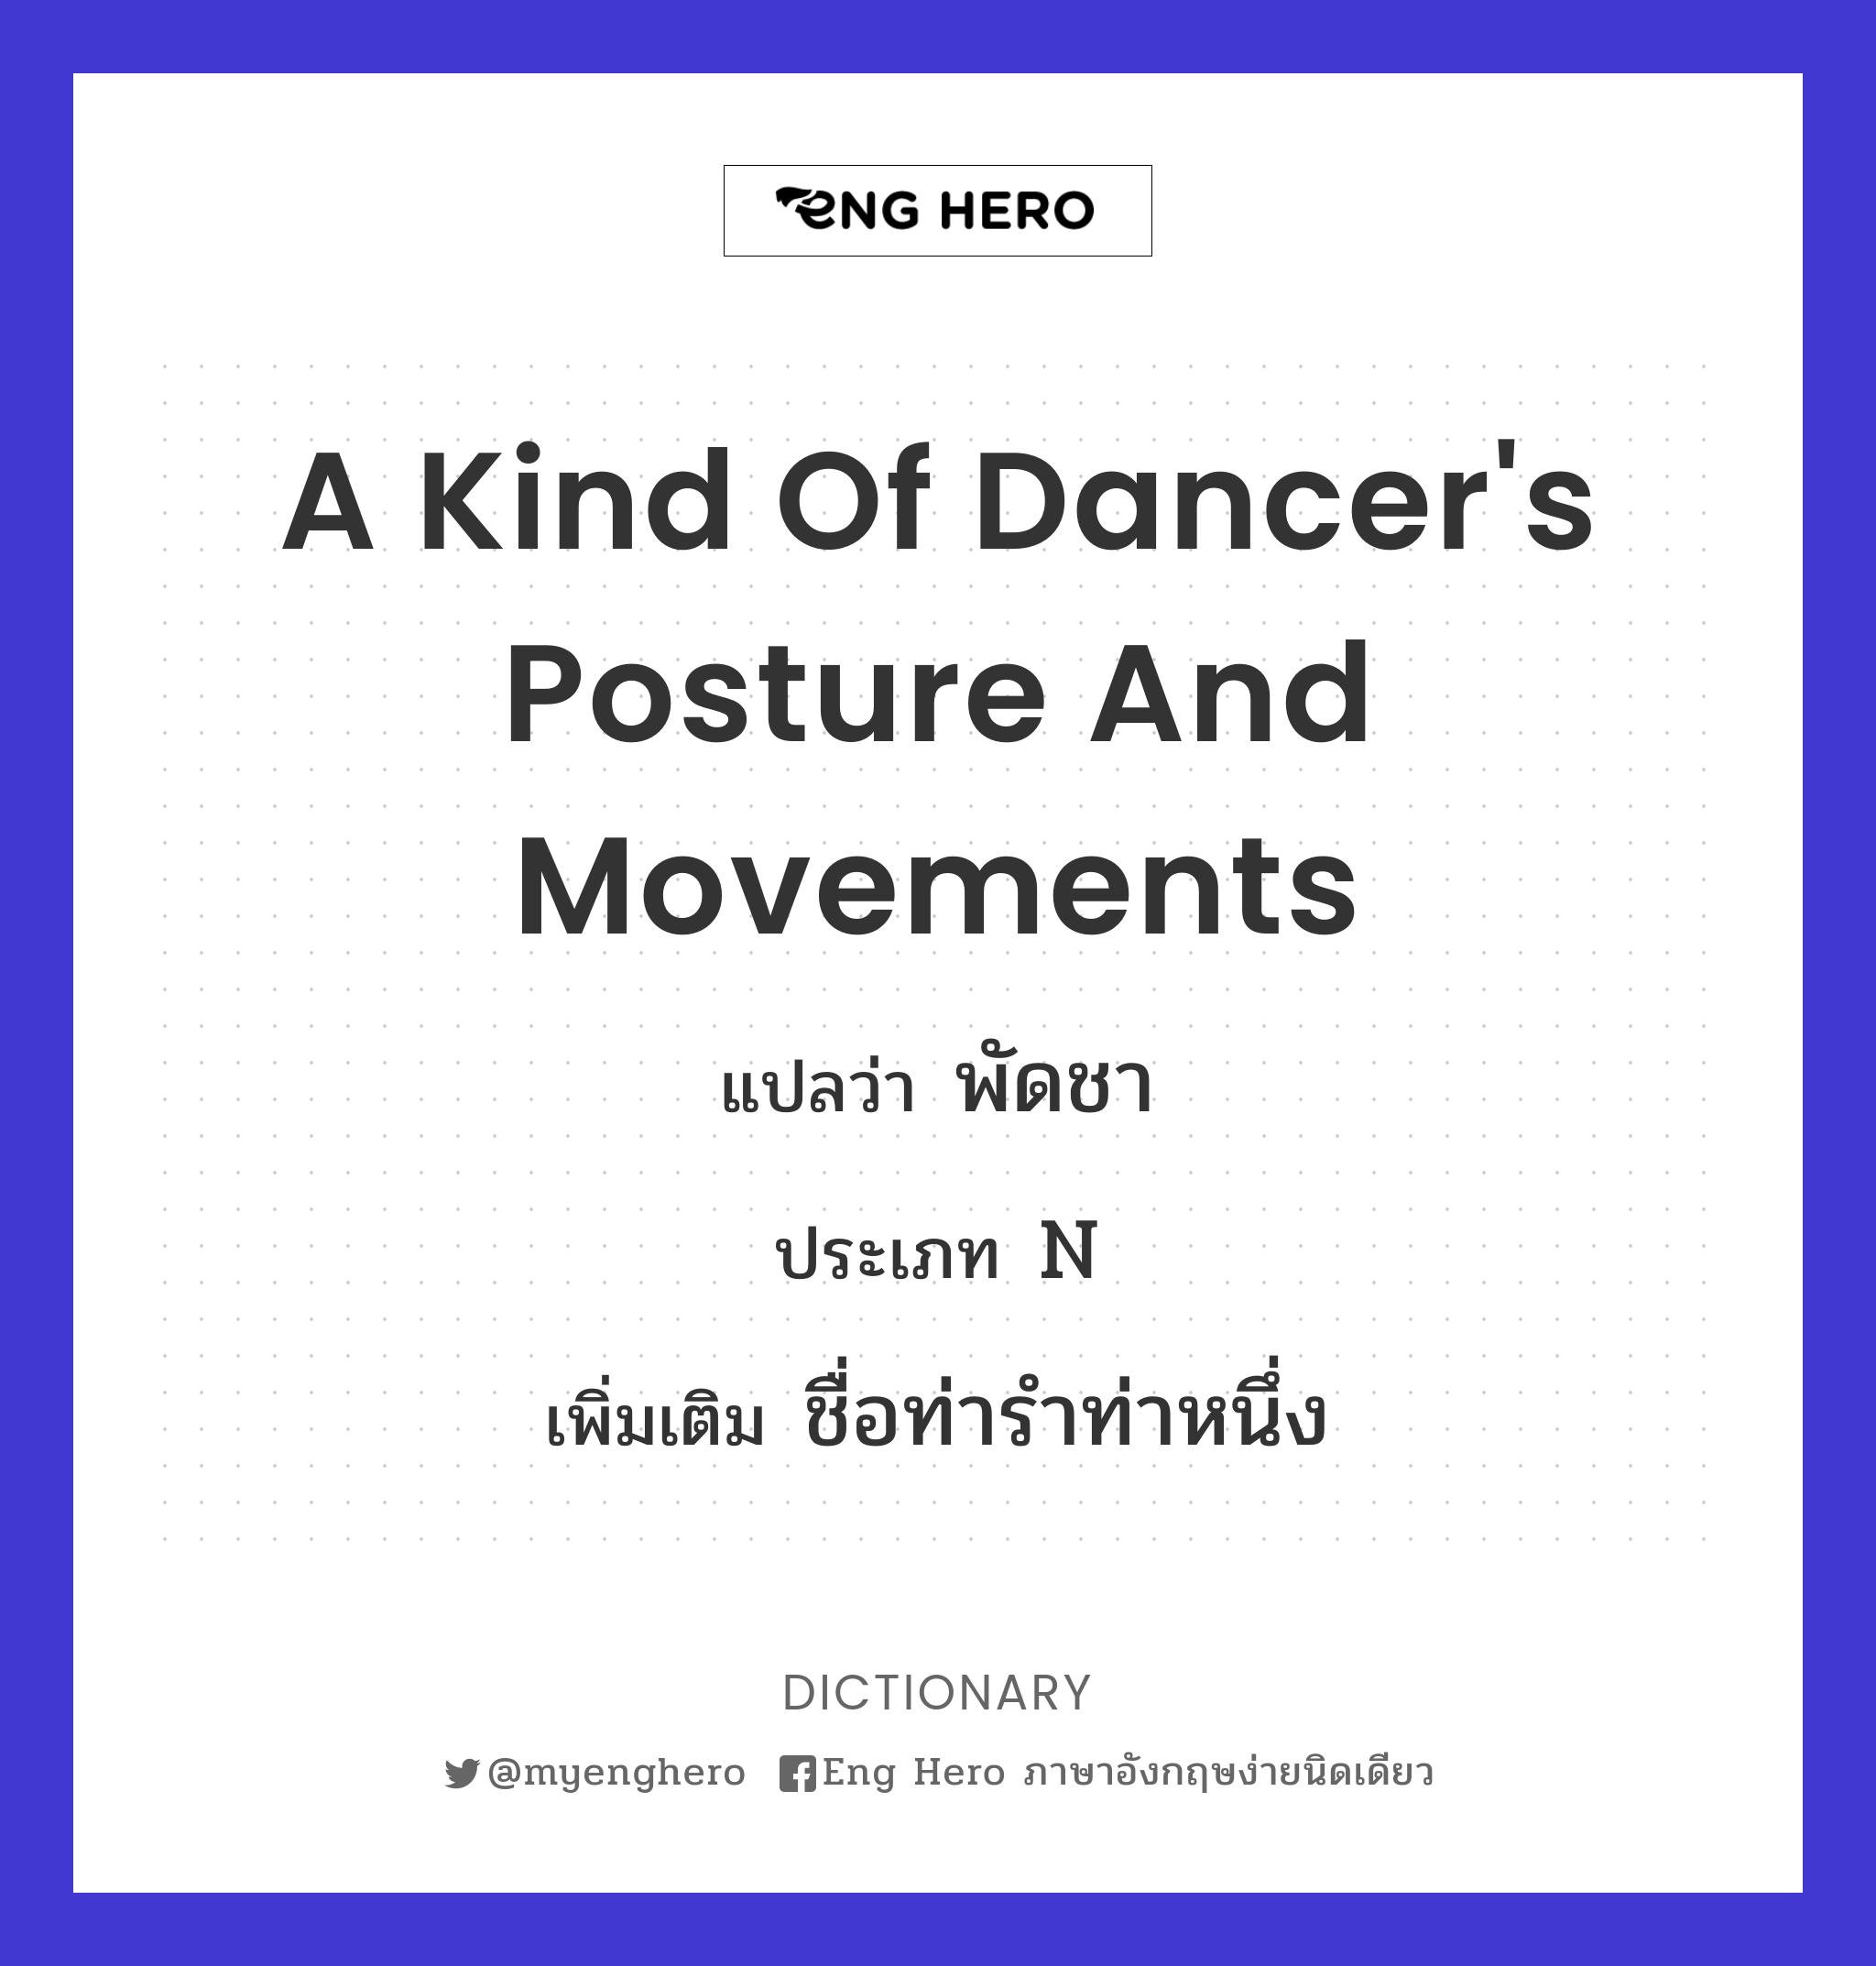 a kind of dancer's posture and movements